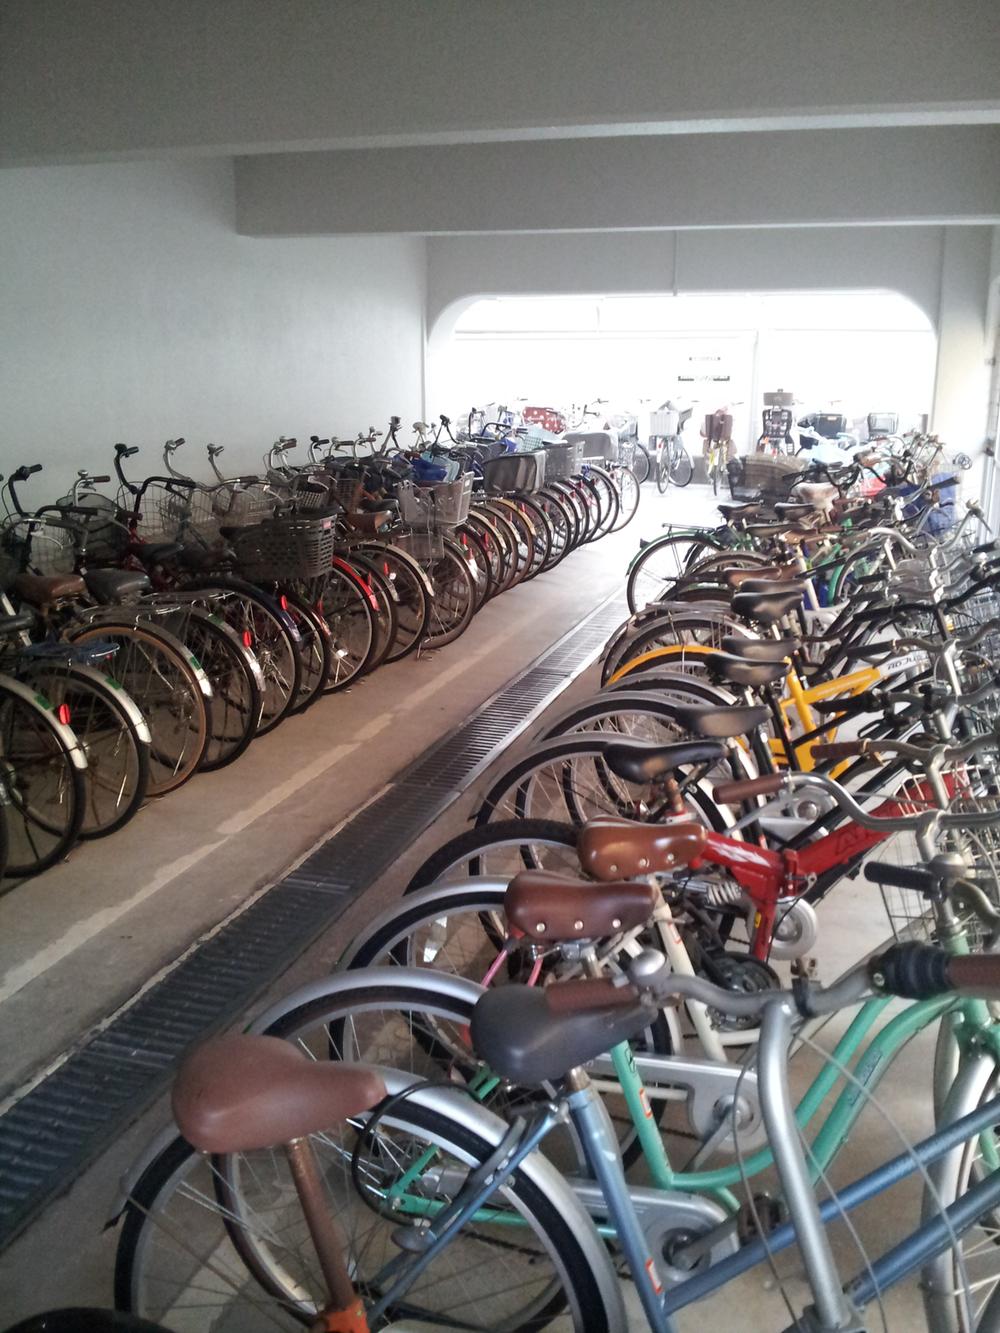 Other common areas. Bicycle parking lot that has been lined up to clean!